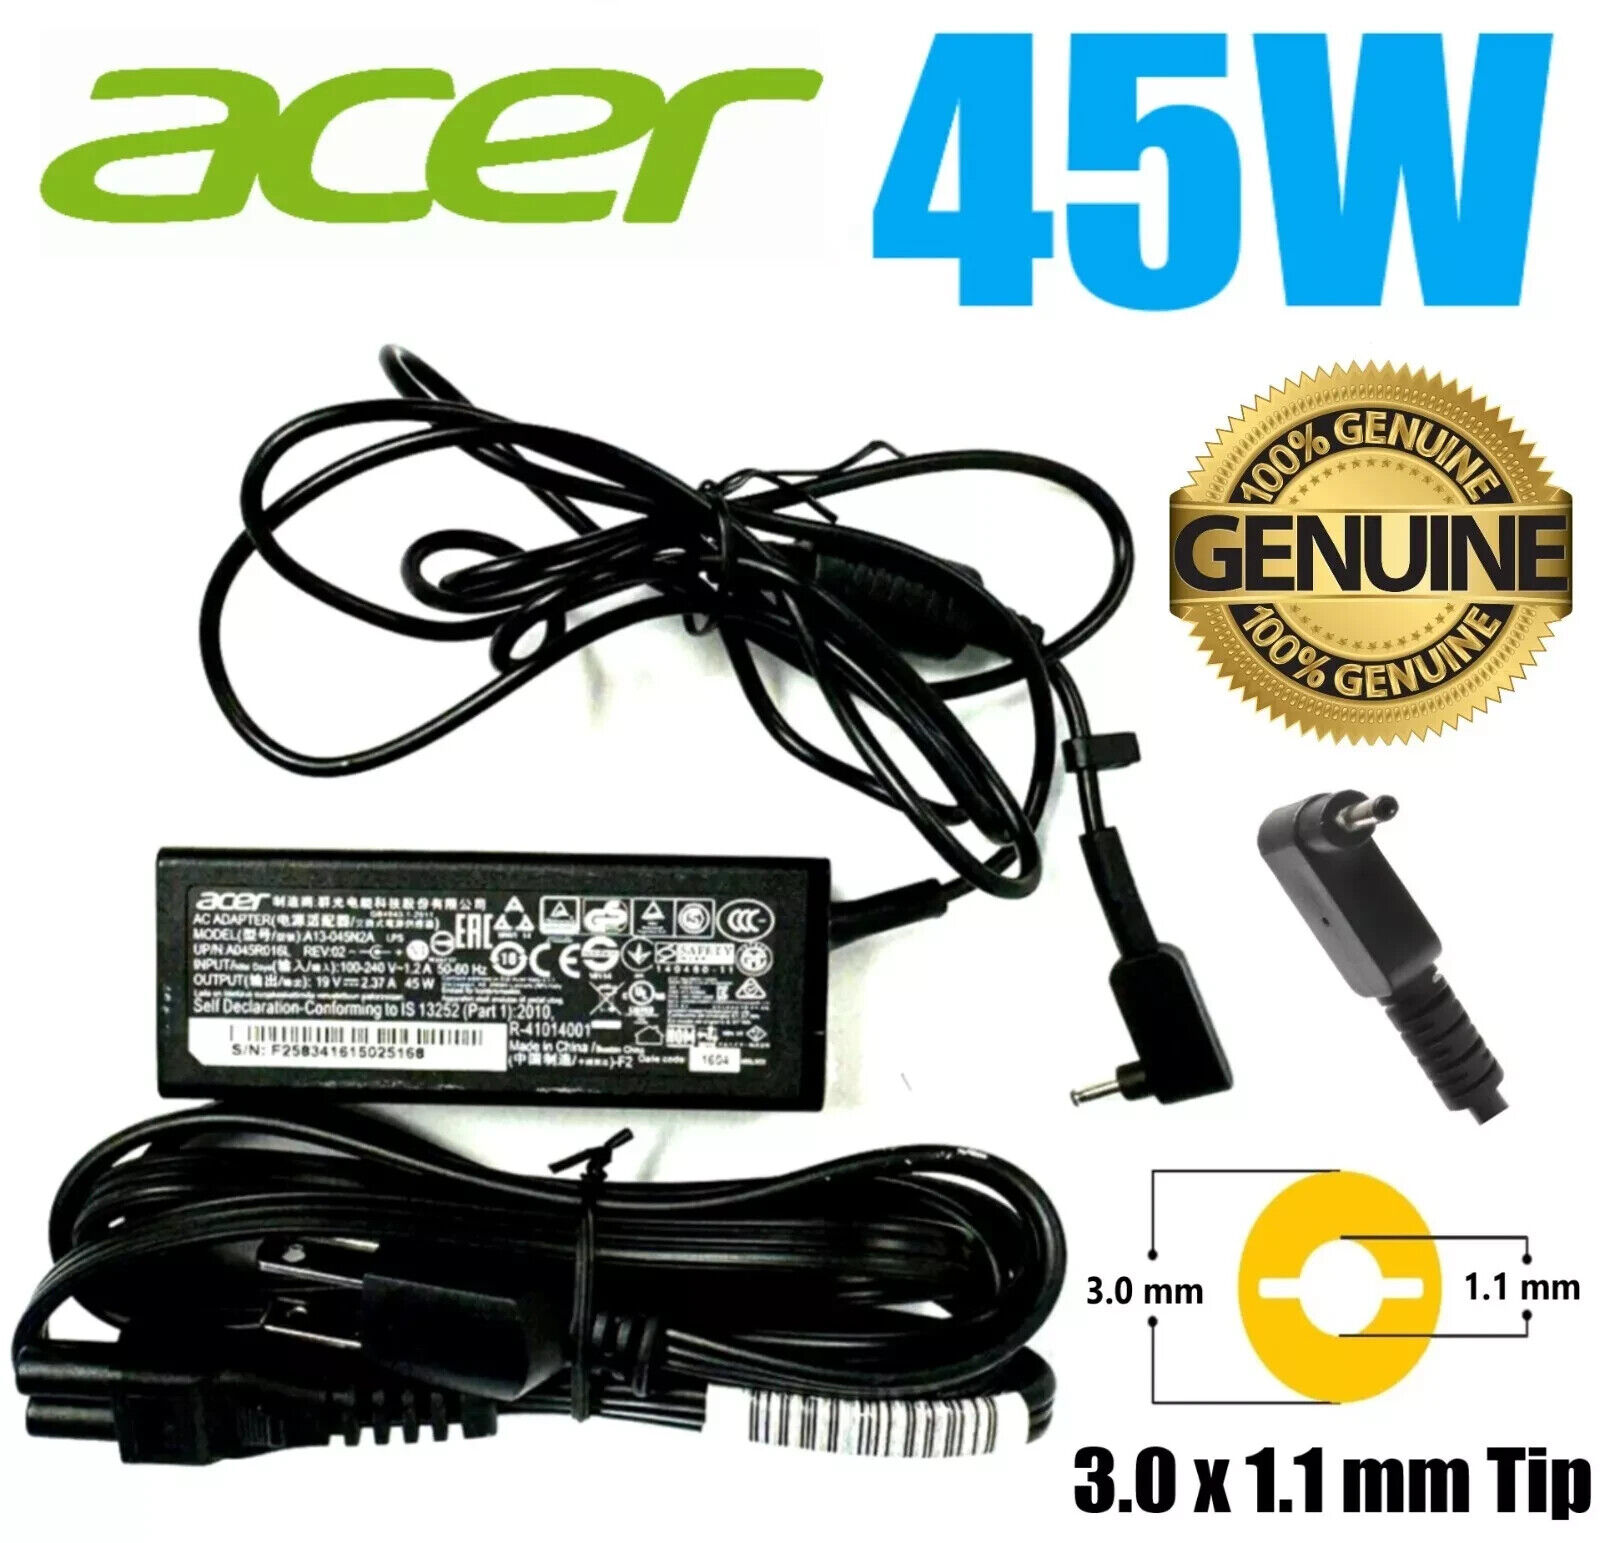 Lot of 10 Acer OEM 45W Adapter for Acer Chromebook11 A13-045N2A C720 PA-1450-26